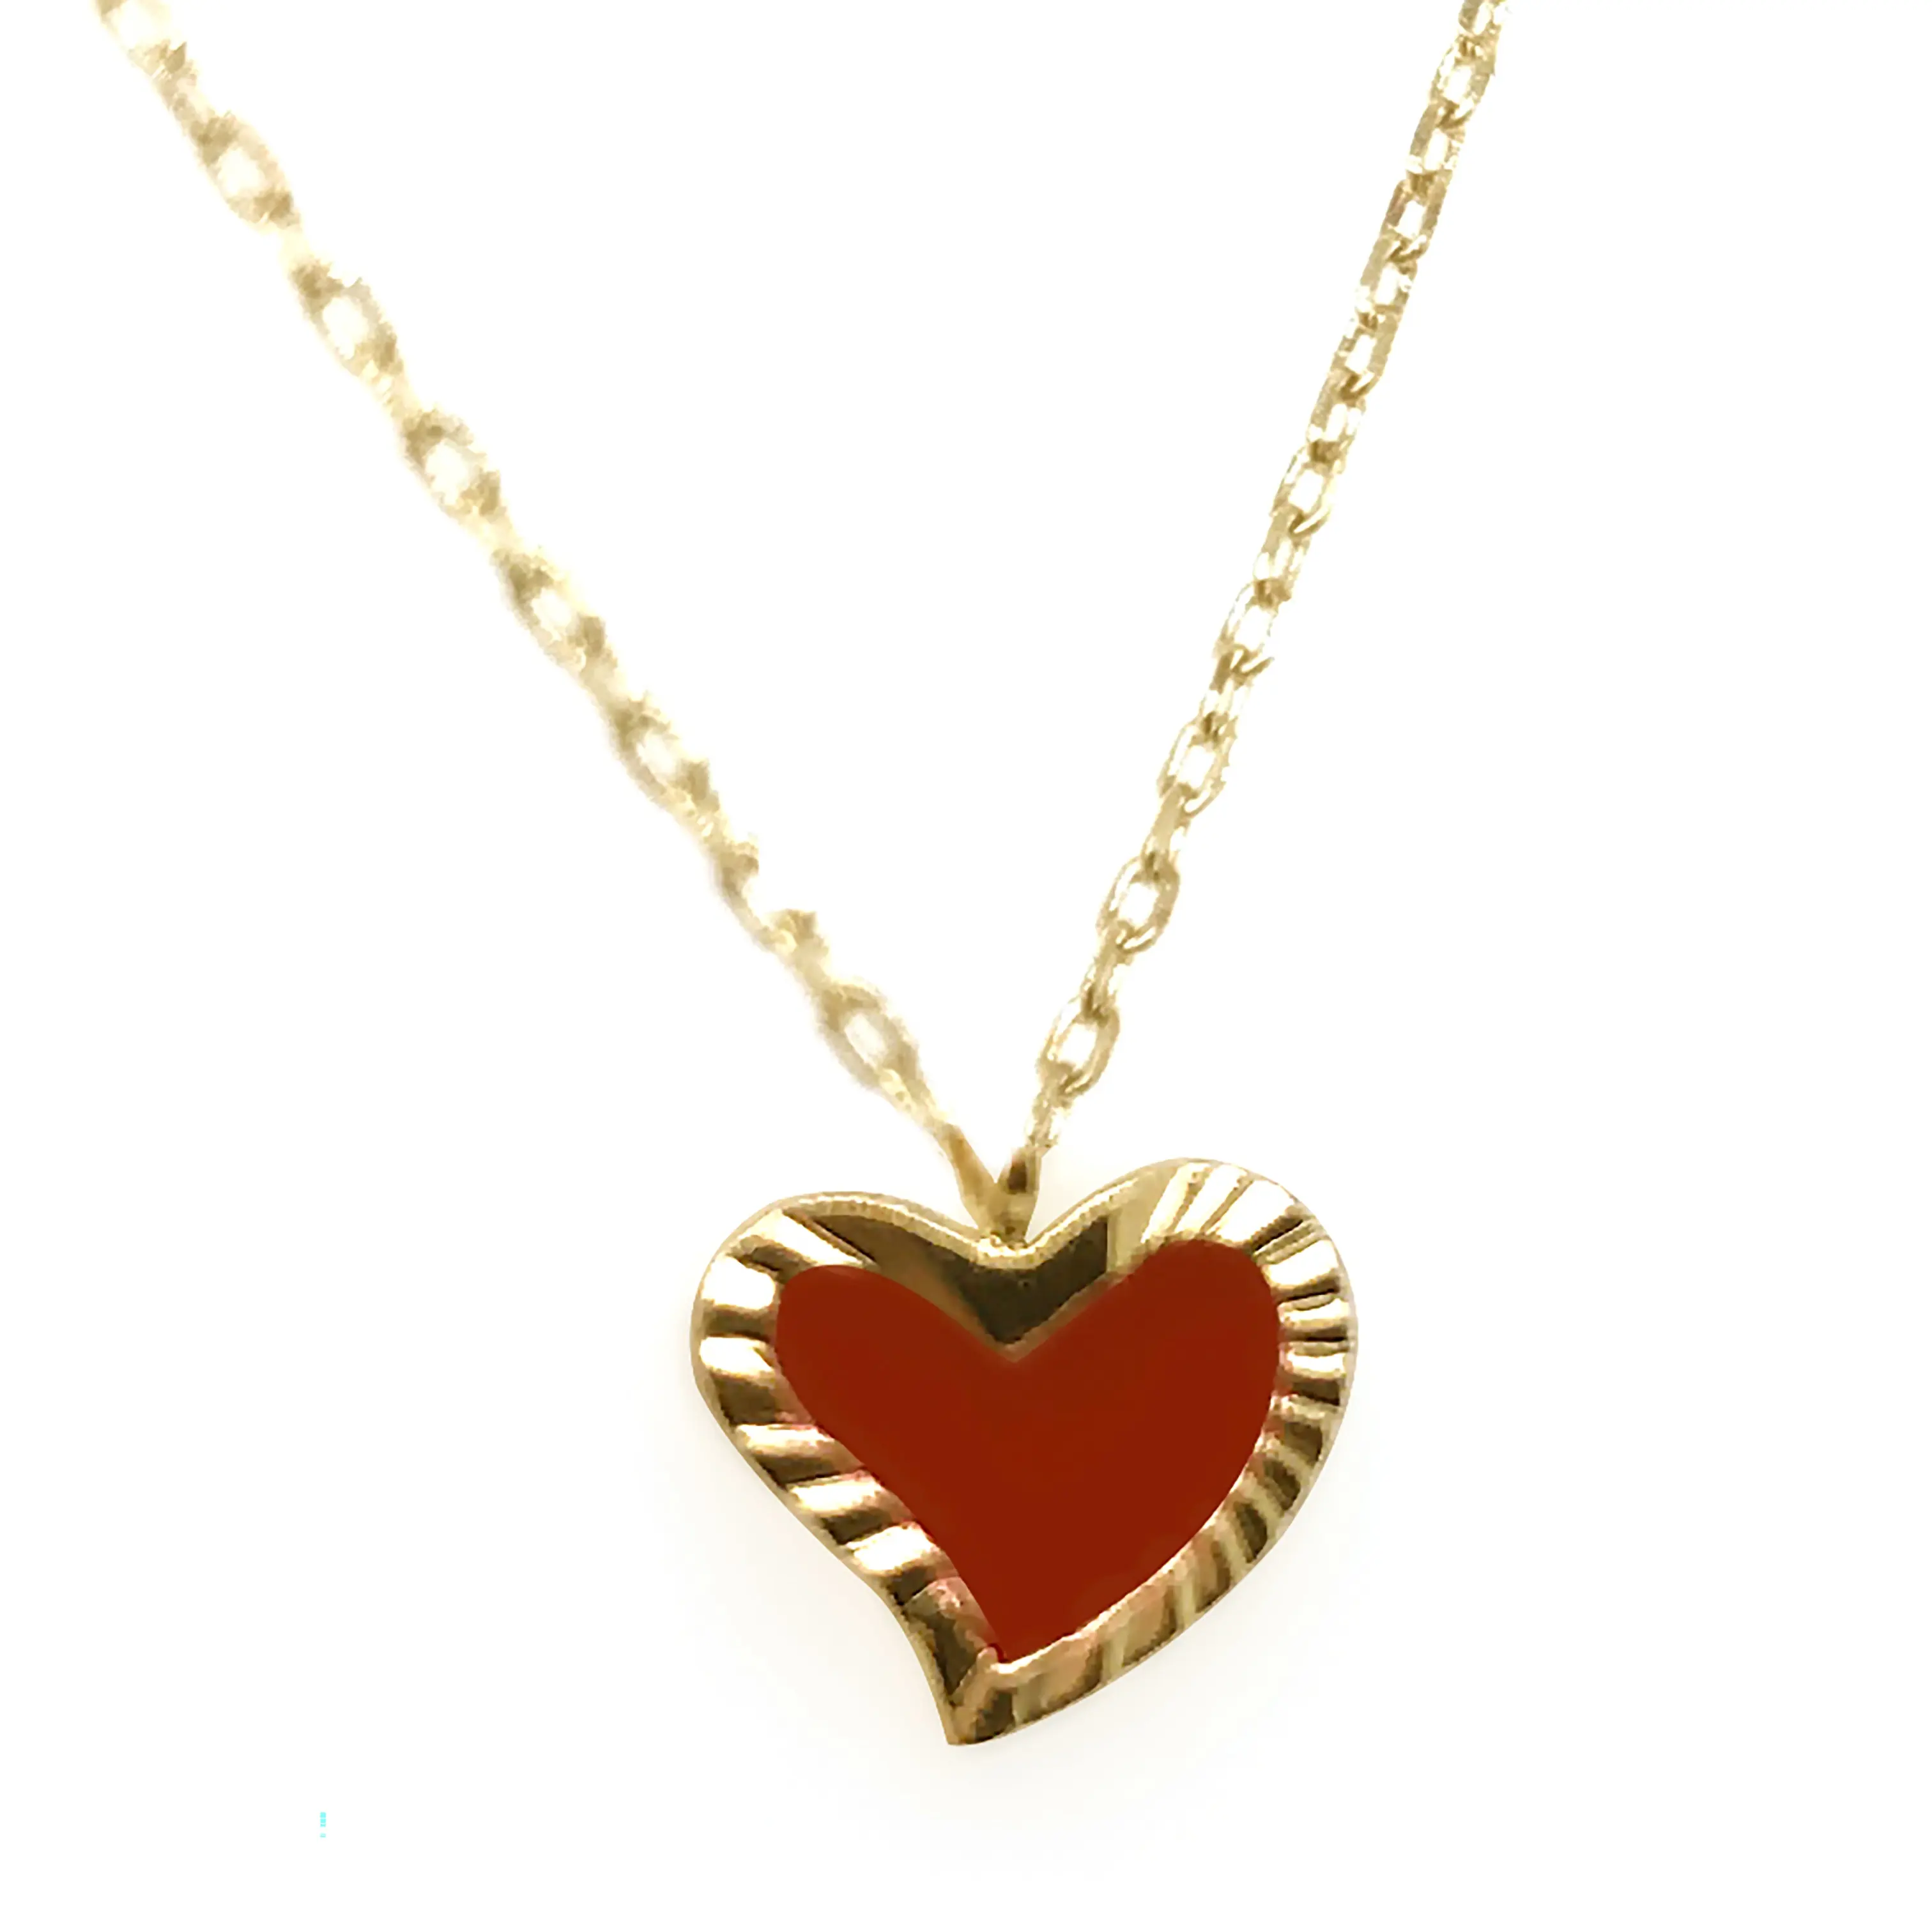 Pendant Necklace Pendant Necklace Gold Plating Embroidery Frame Epoxy Red Heart Pendant Jewelry Necklace Charm Necklaces Link Chain Sterling Silver Brass Cute